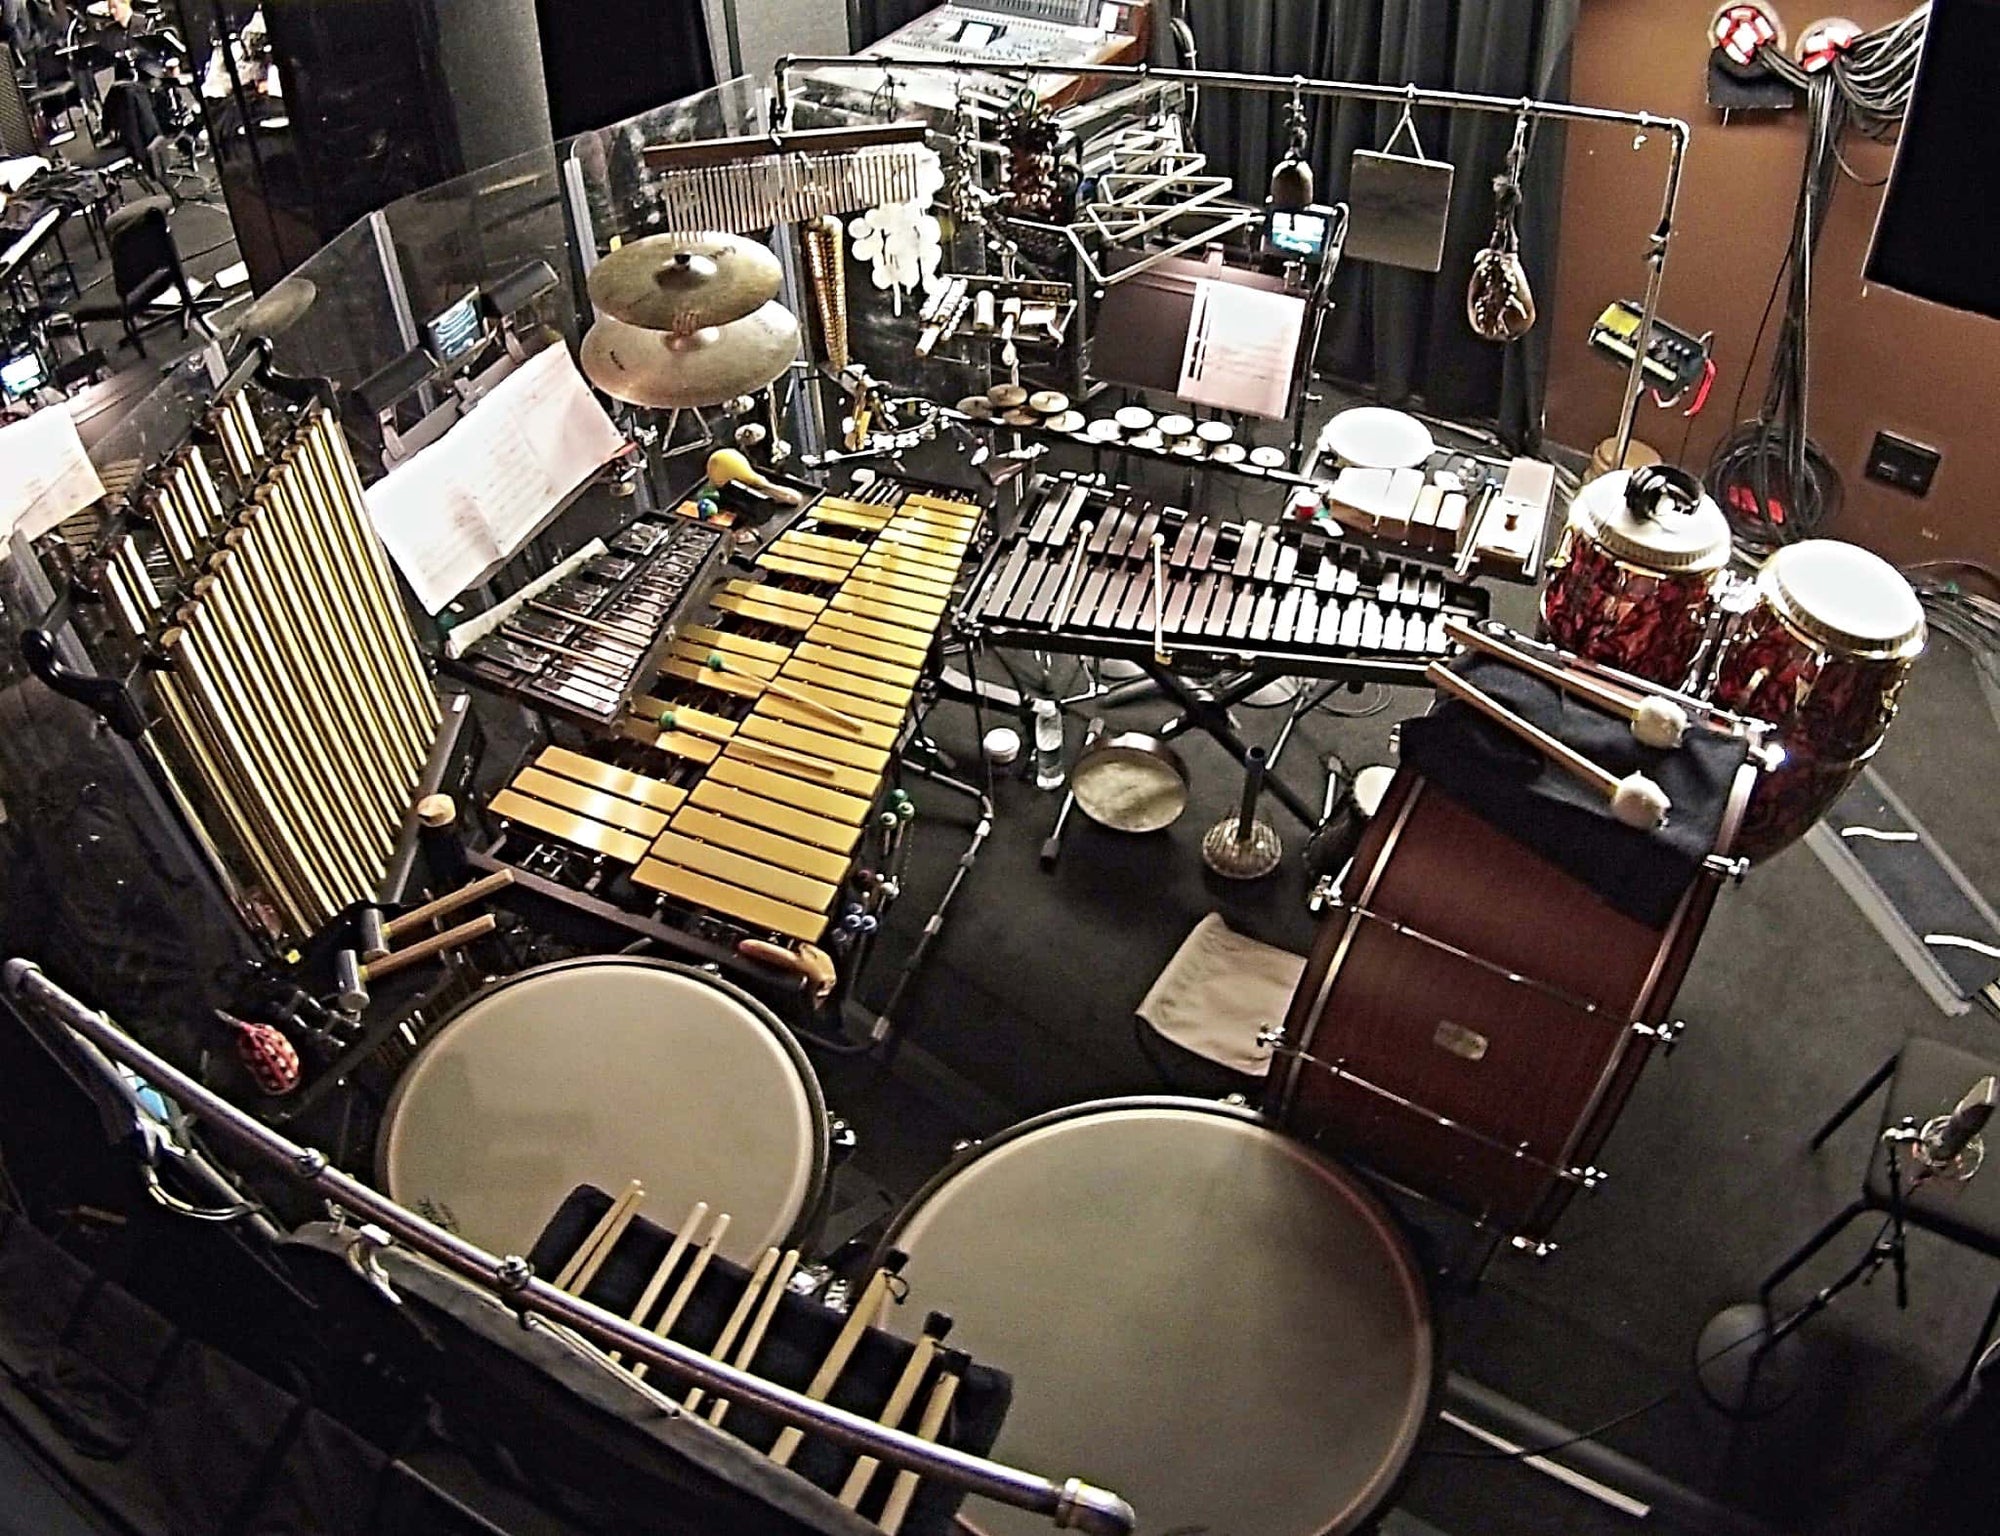 Alex Stopa's percussion setup for Wicked at The Smith Center in Las Vegas, Nevada.